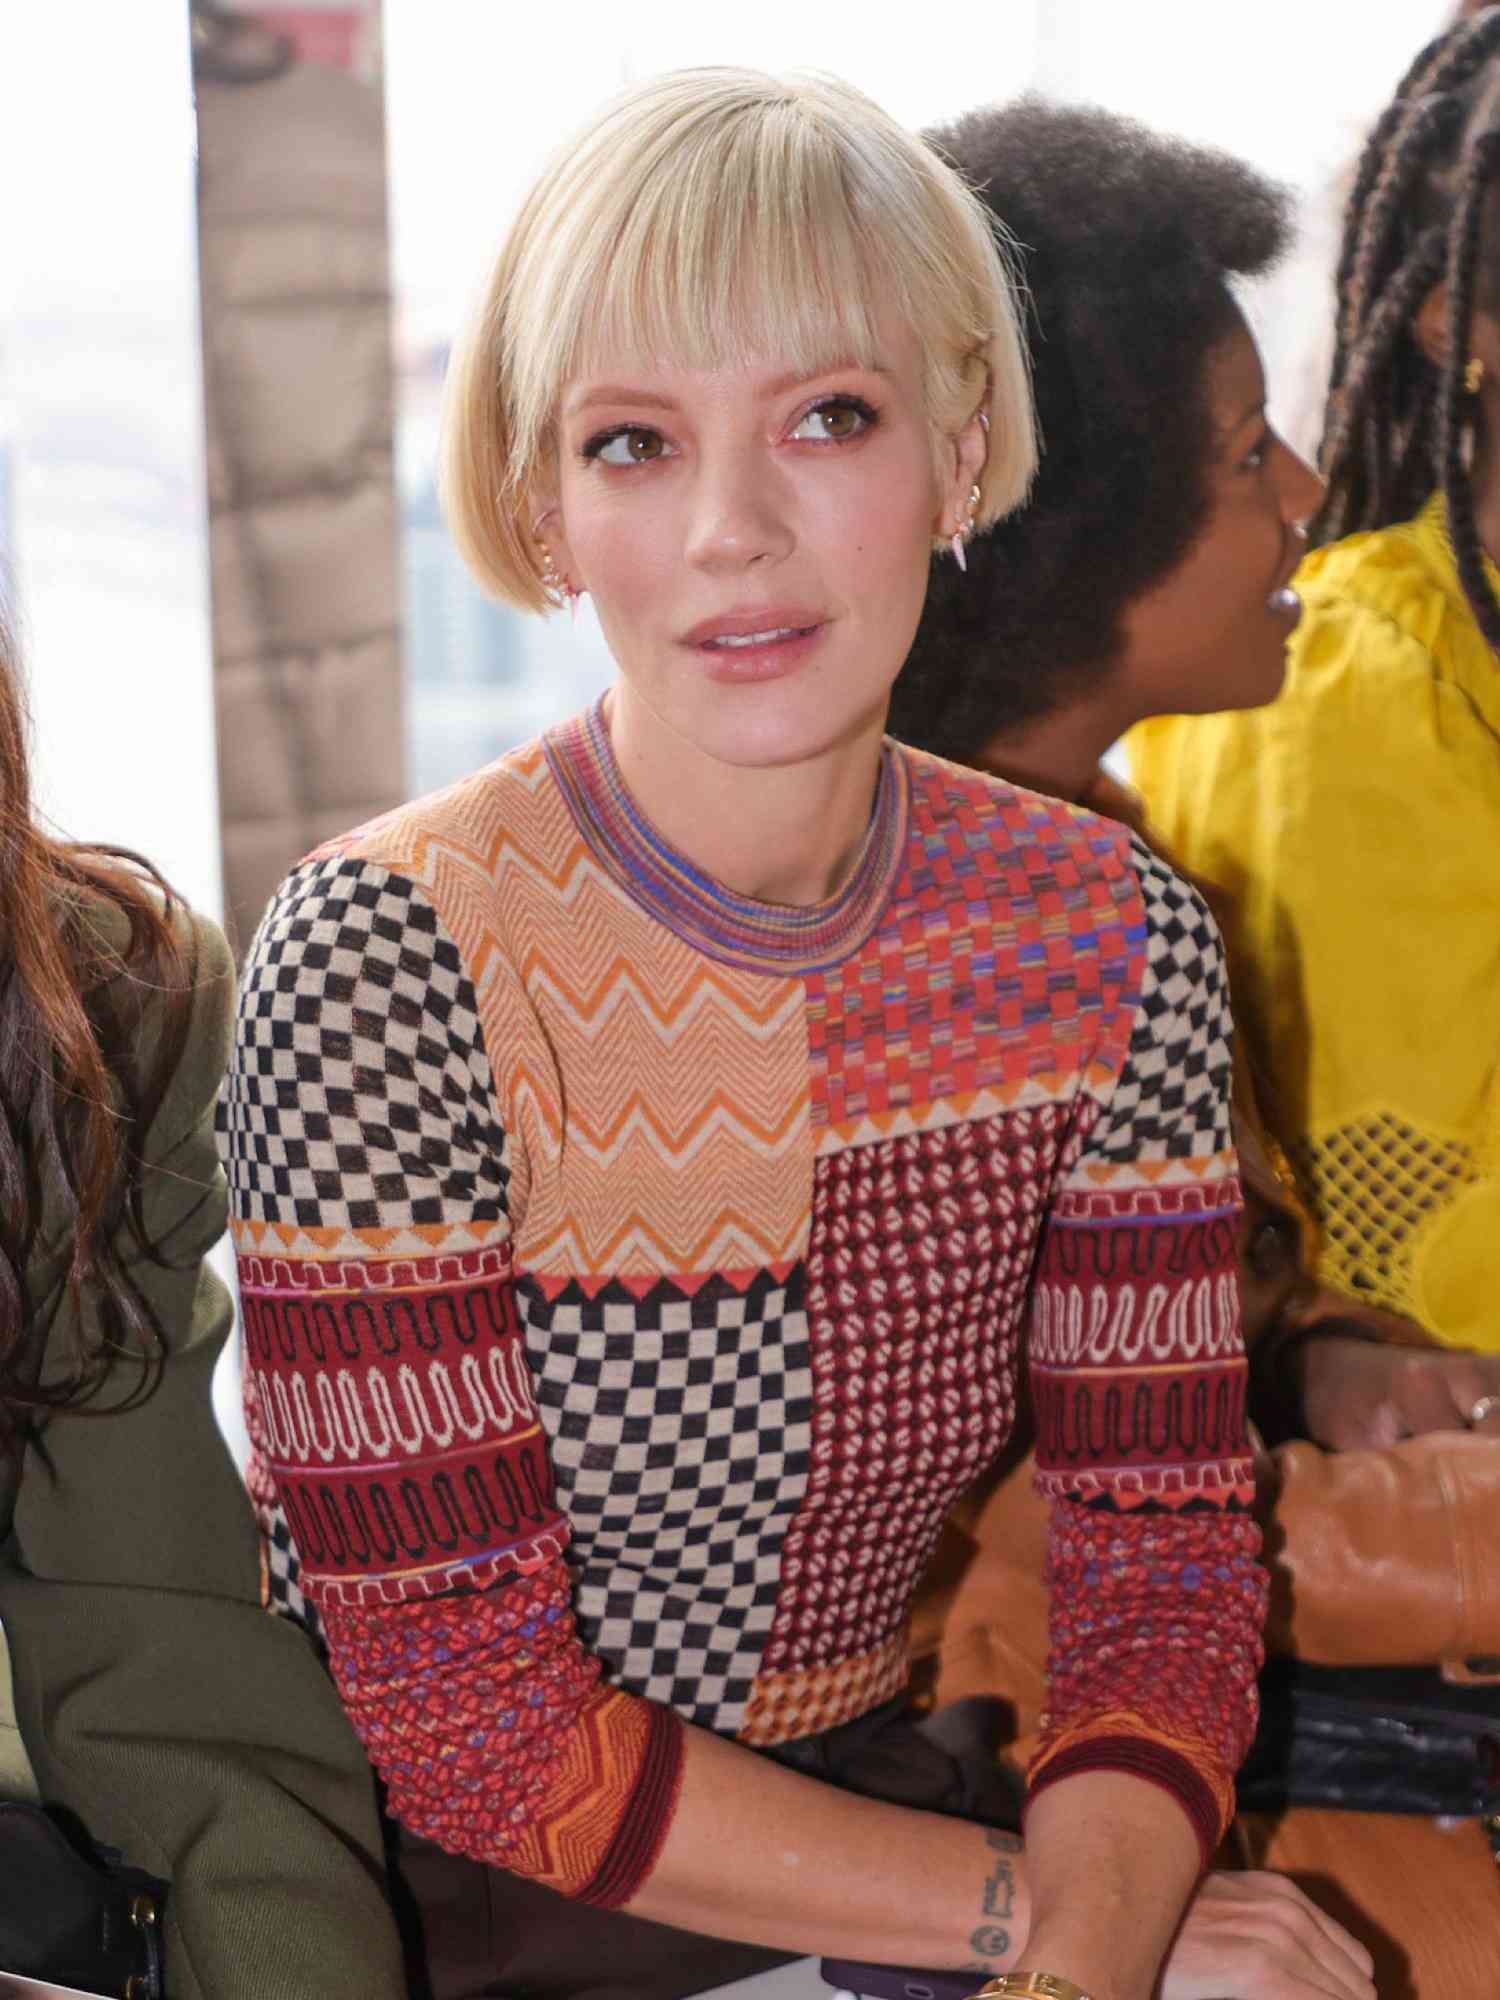 Lily Allen with a blonde bob hairstyle